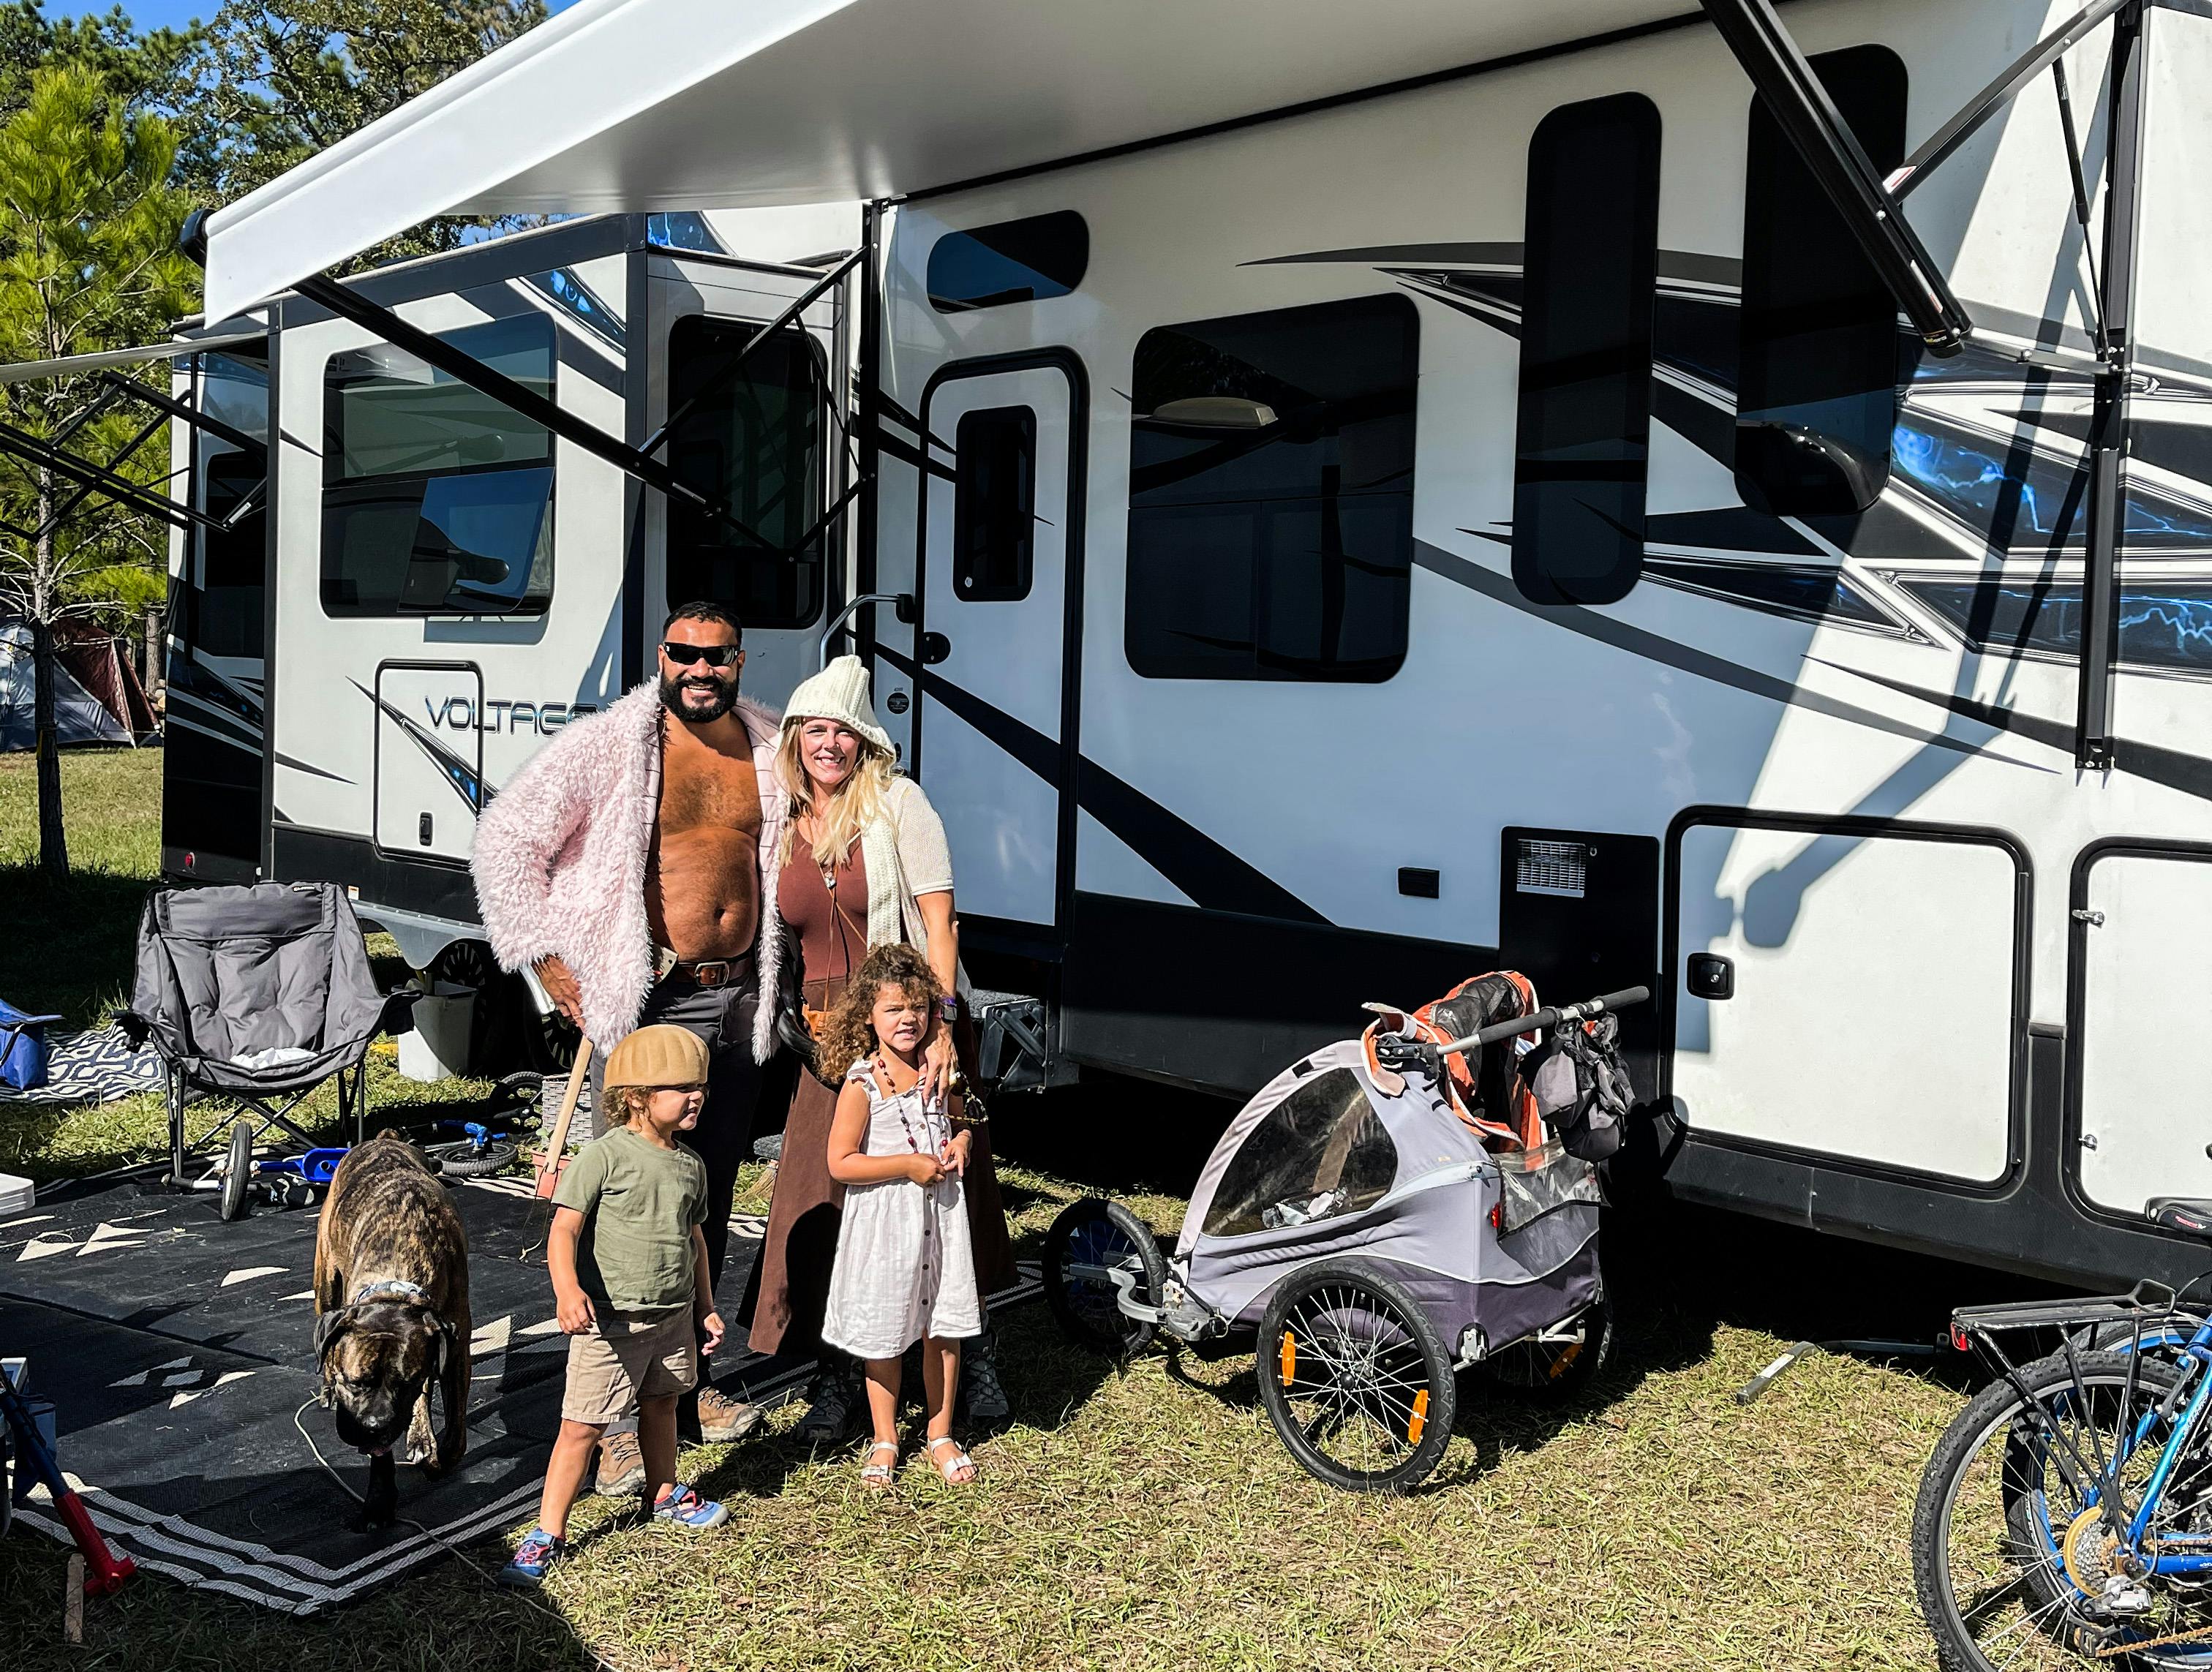 Samantha Edmunds and her family in front of their RV at the Texas Renaissance Festival

